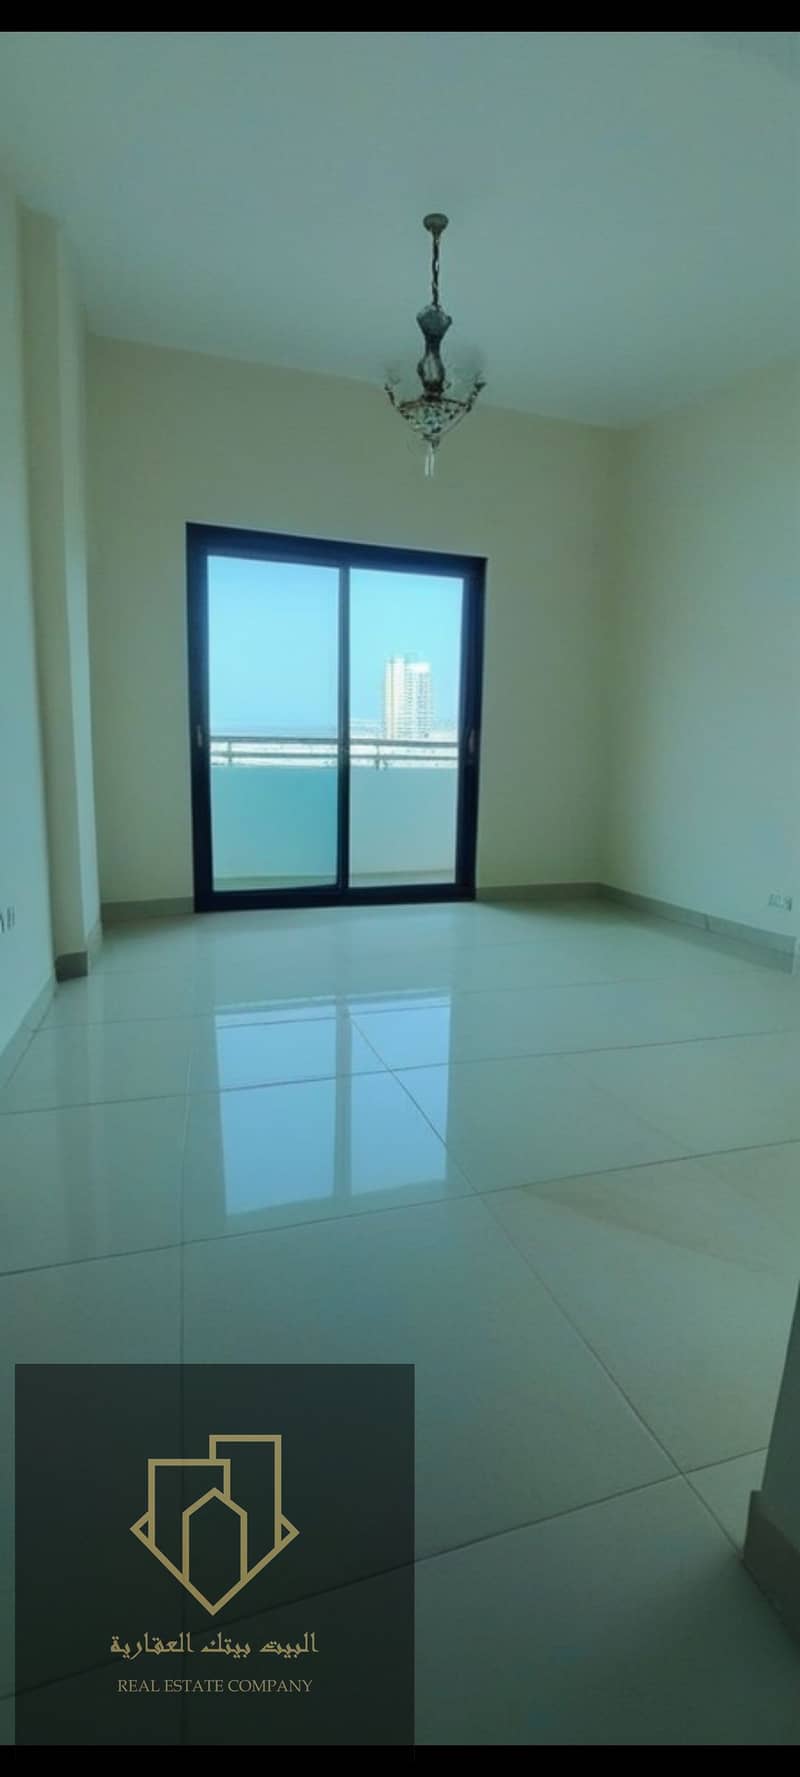 Enjoy living in a distinctive apartment consisting of one room and a hall in a central location close to all public and private services. The apartment guarantees you easy movement to all exits